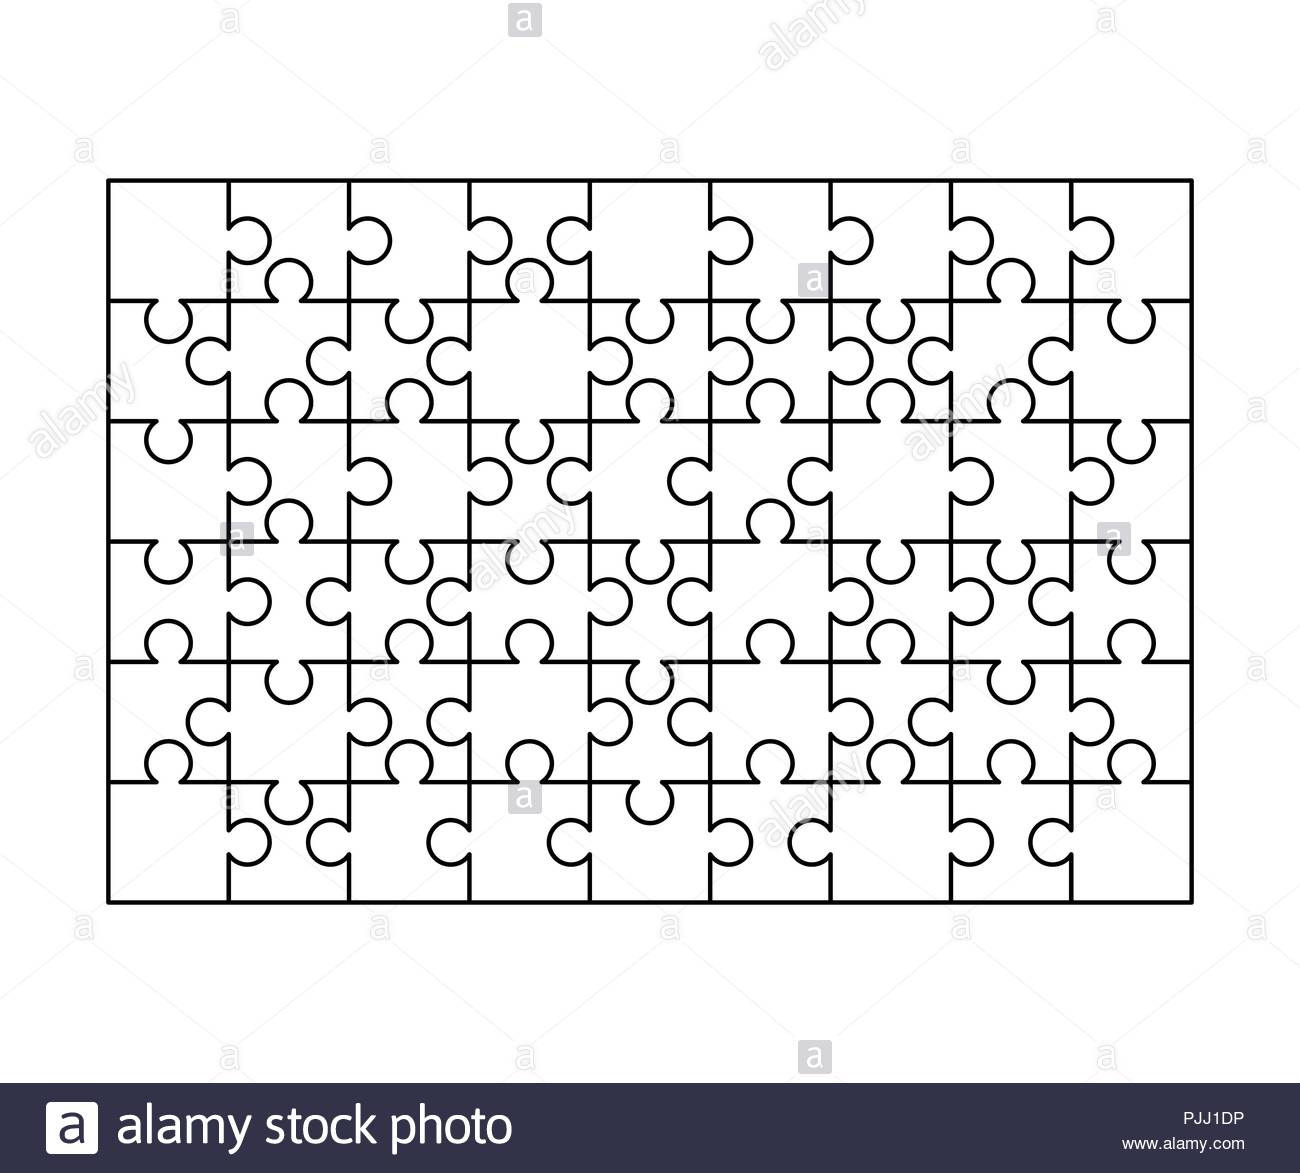 64 White Puzzles Pieces Arranged In A Square. Jigsaw Puzzle Template - Print Jigsaw Puzzle